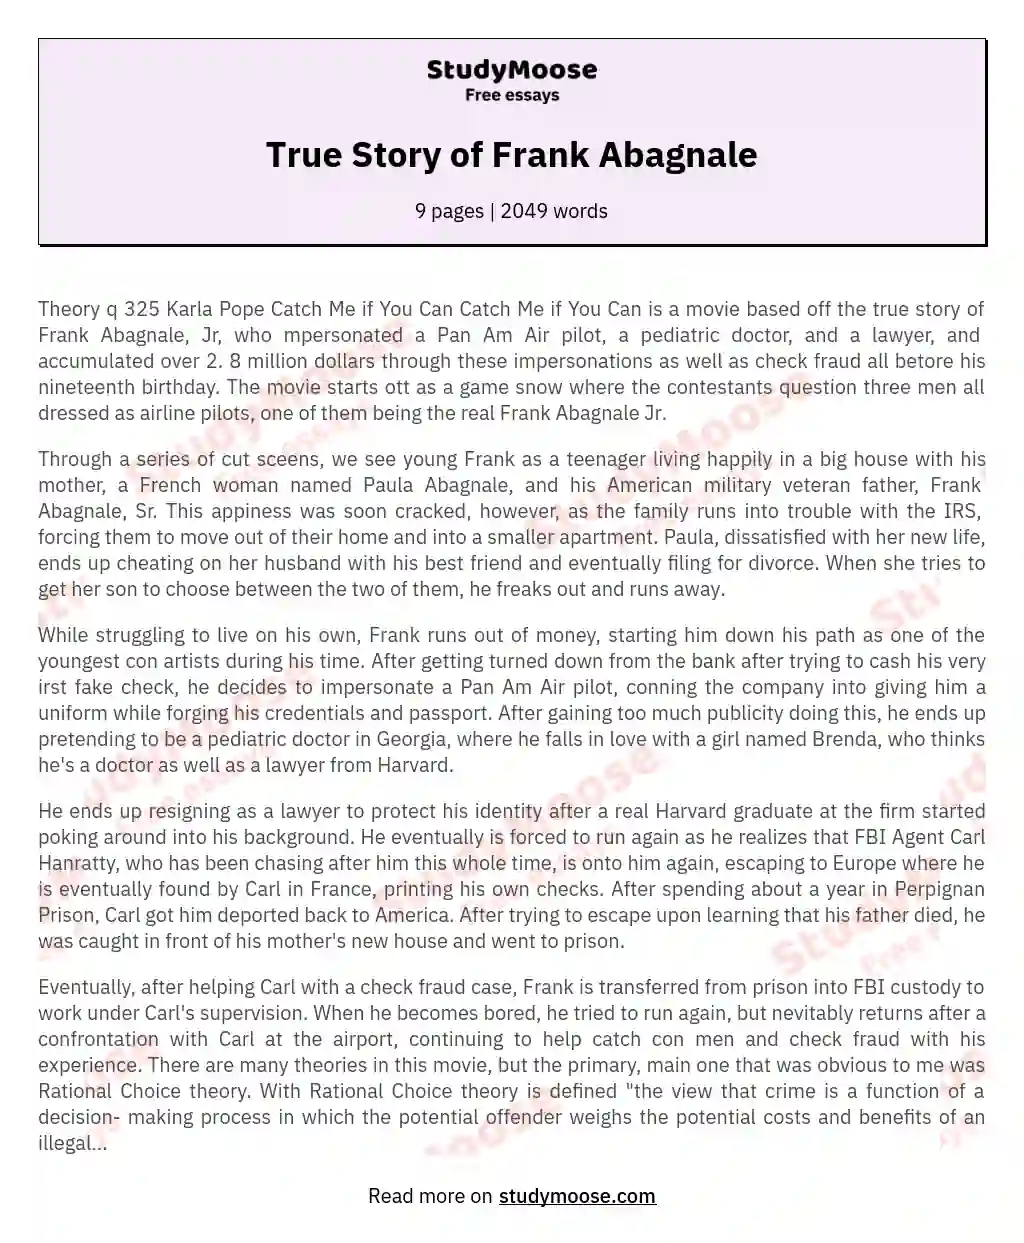 True Story of  Frank Abagnale essay